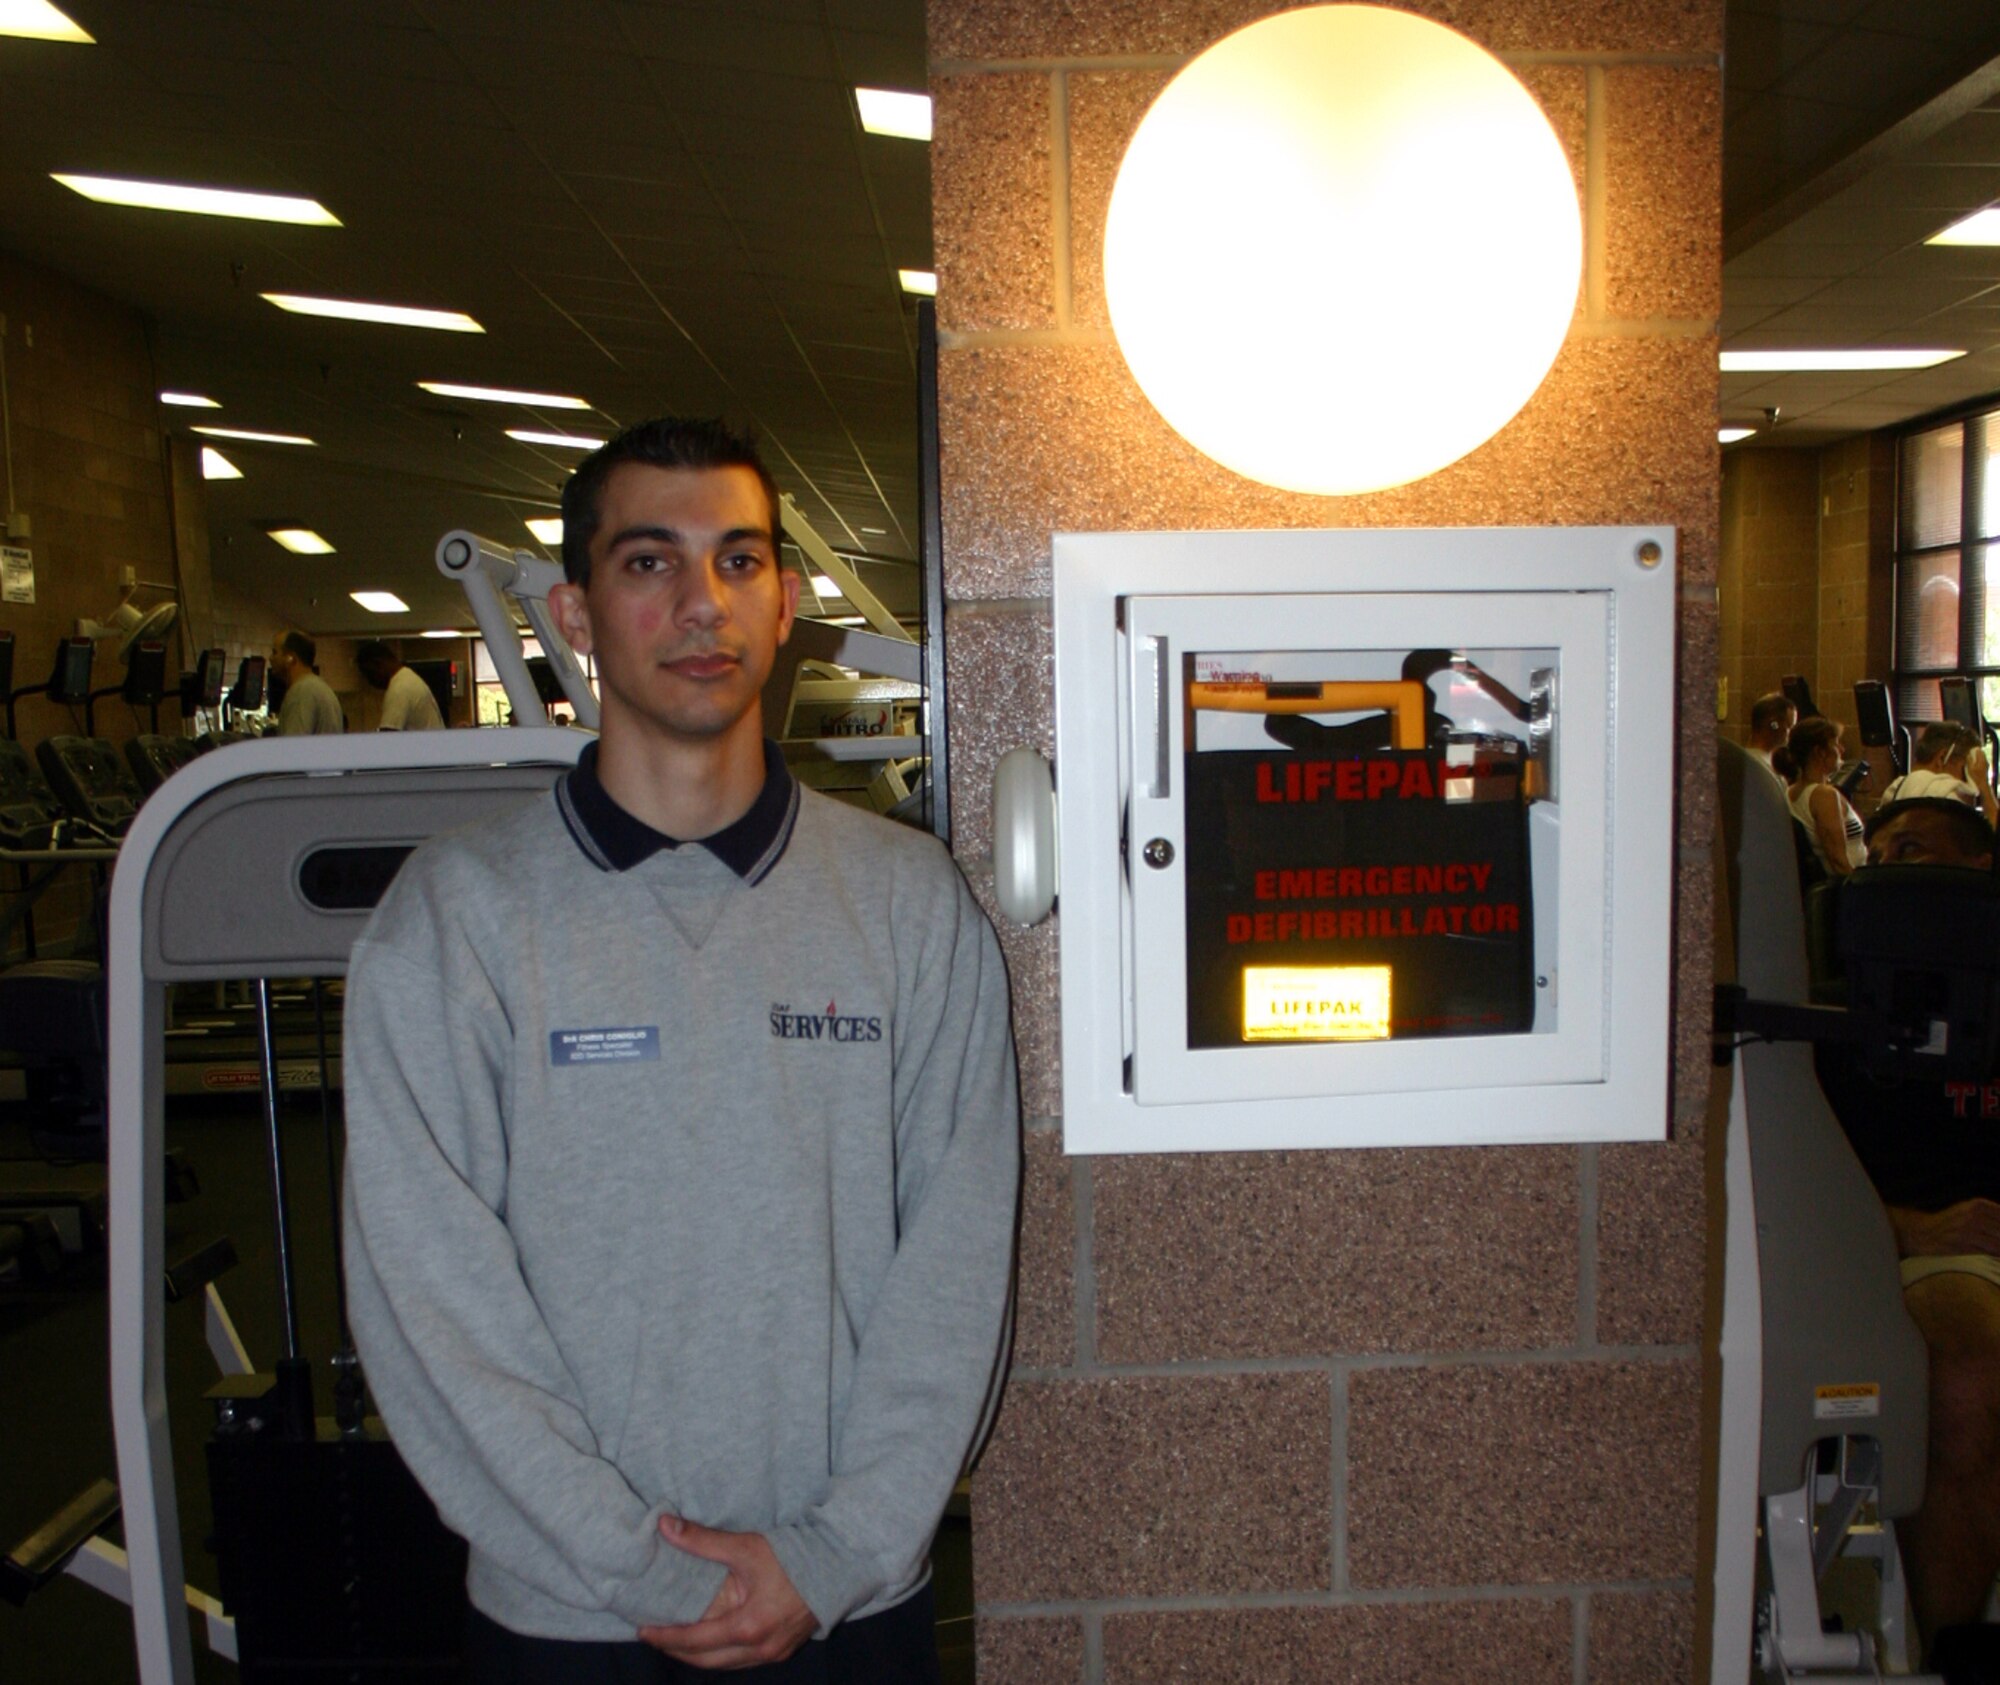 Senior Airman Christopher Coniglio stands alongside the AED he used to save the life of an OSI agent at the Levitow Fitness Center April 18. (U.S. Air Force photo/Staff Sgt. Tonnette Thompson)